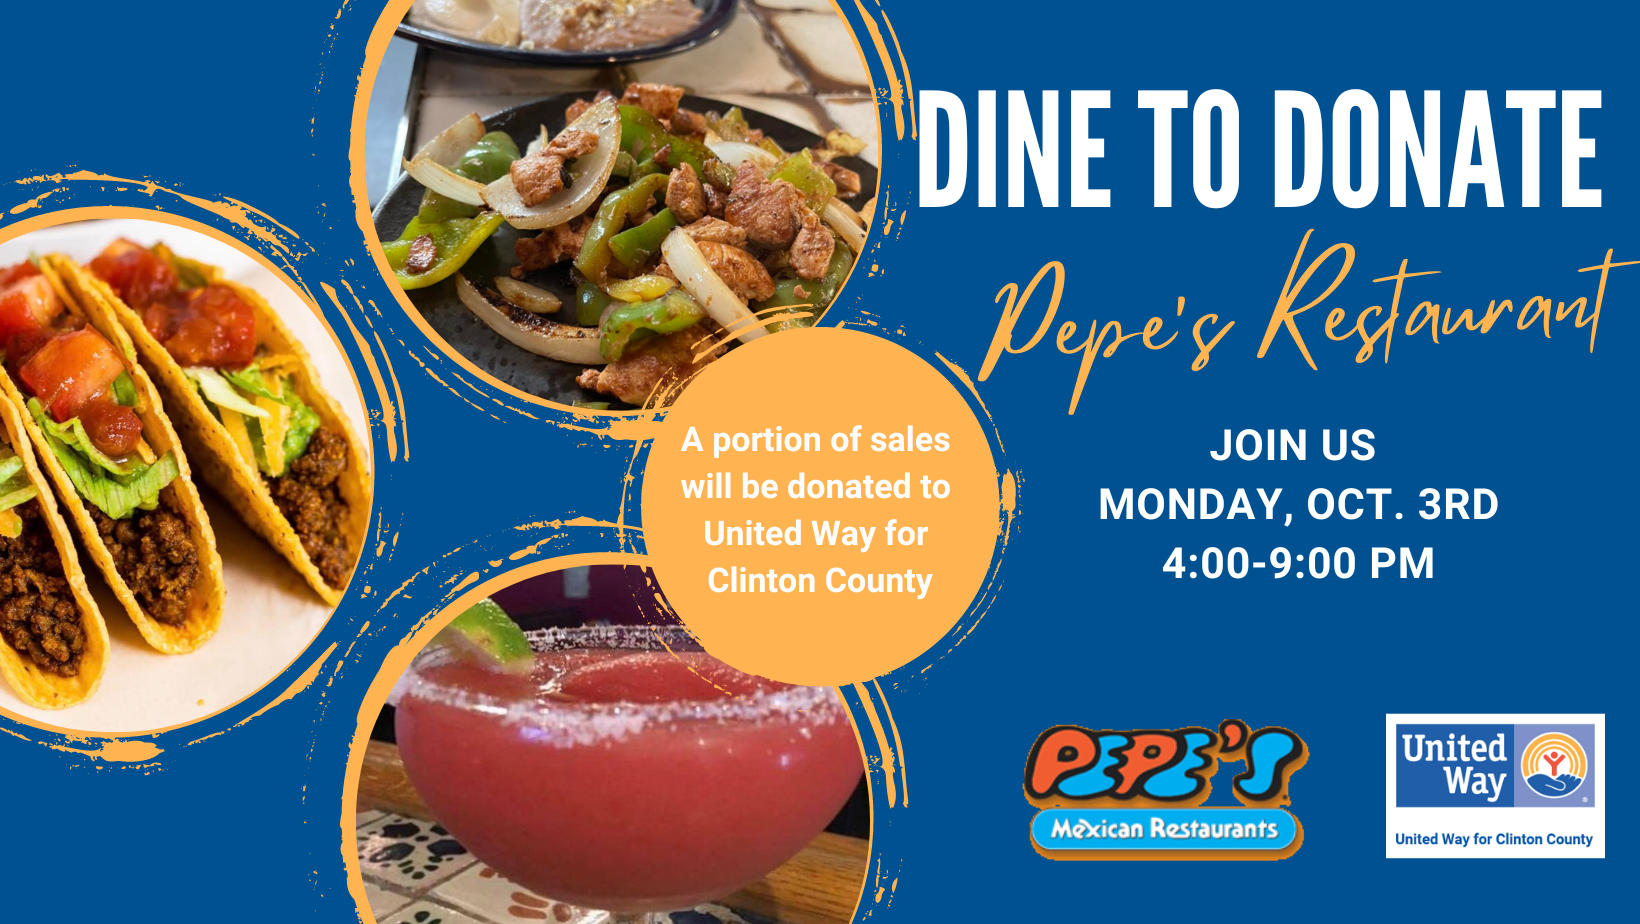 Dine to Donate at Frankfort Pepe’s Monday October 3rd